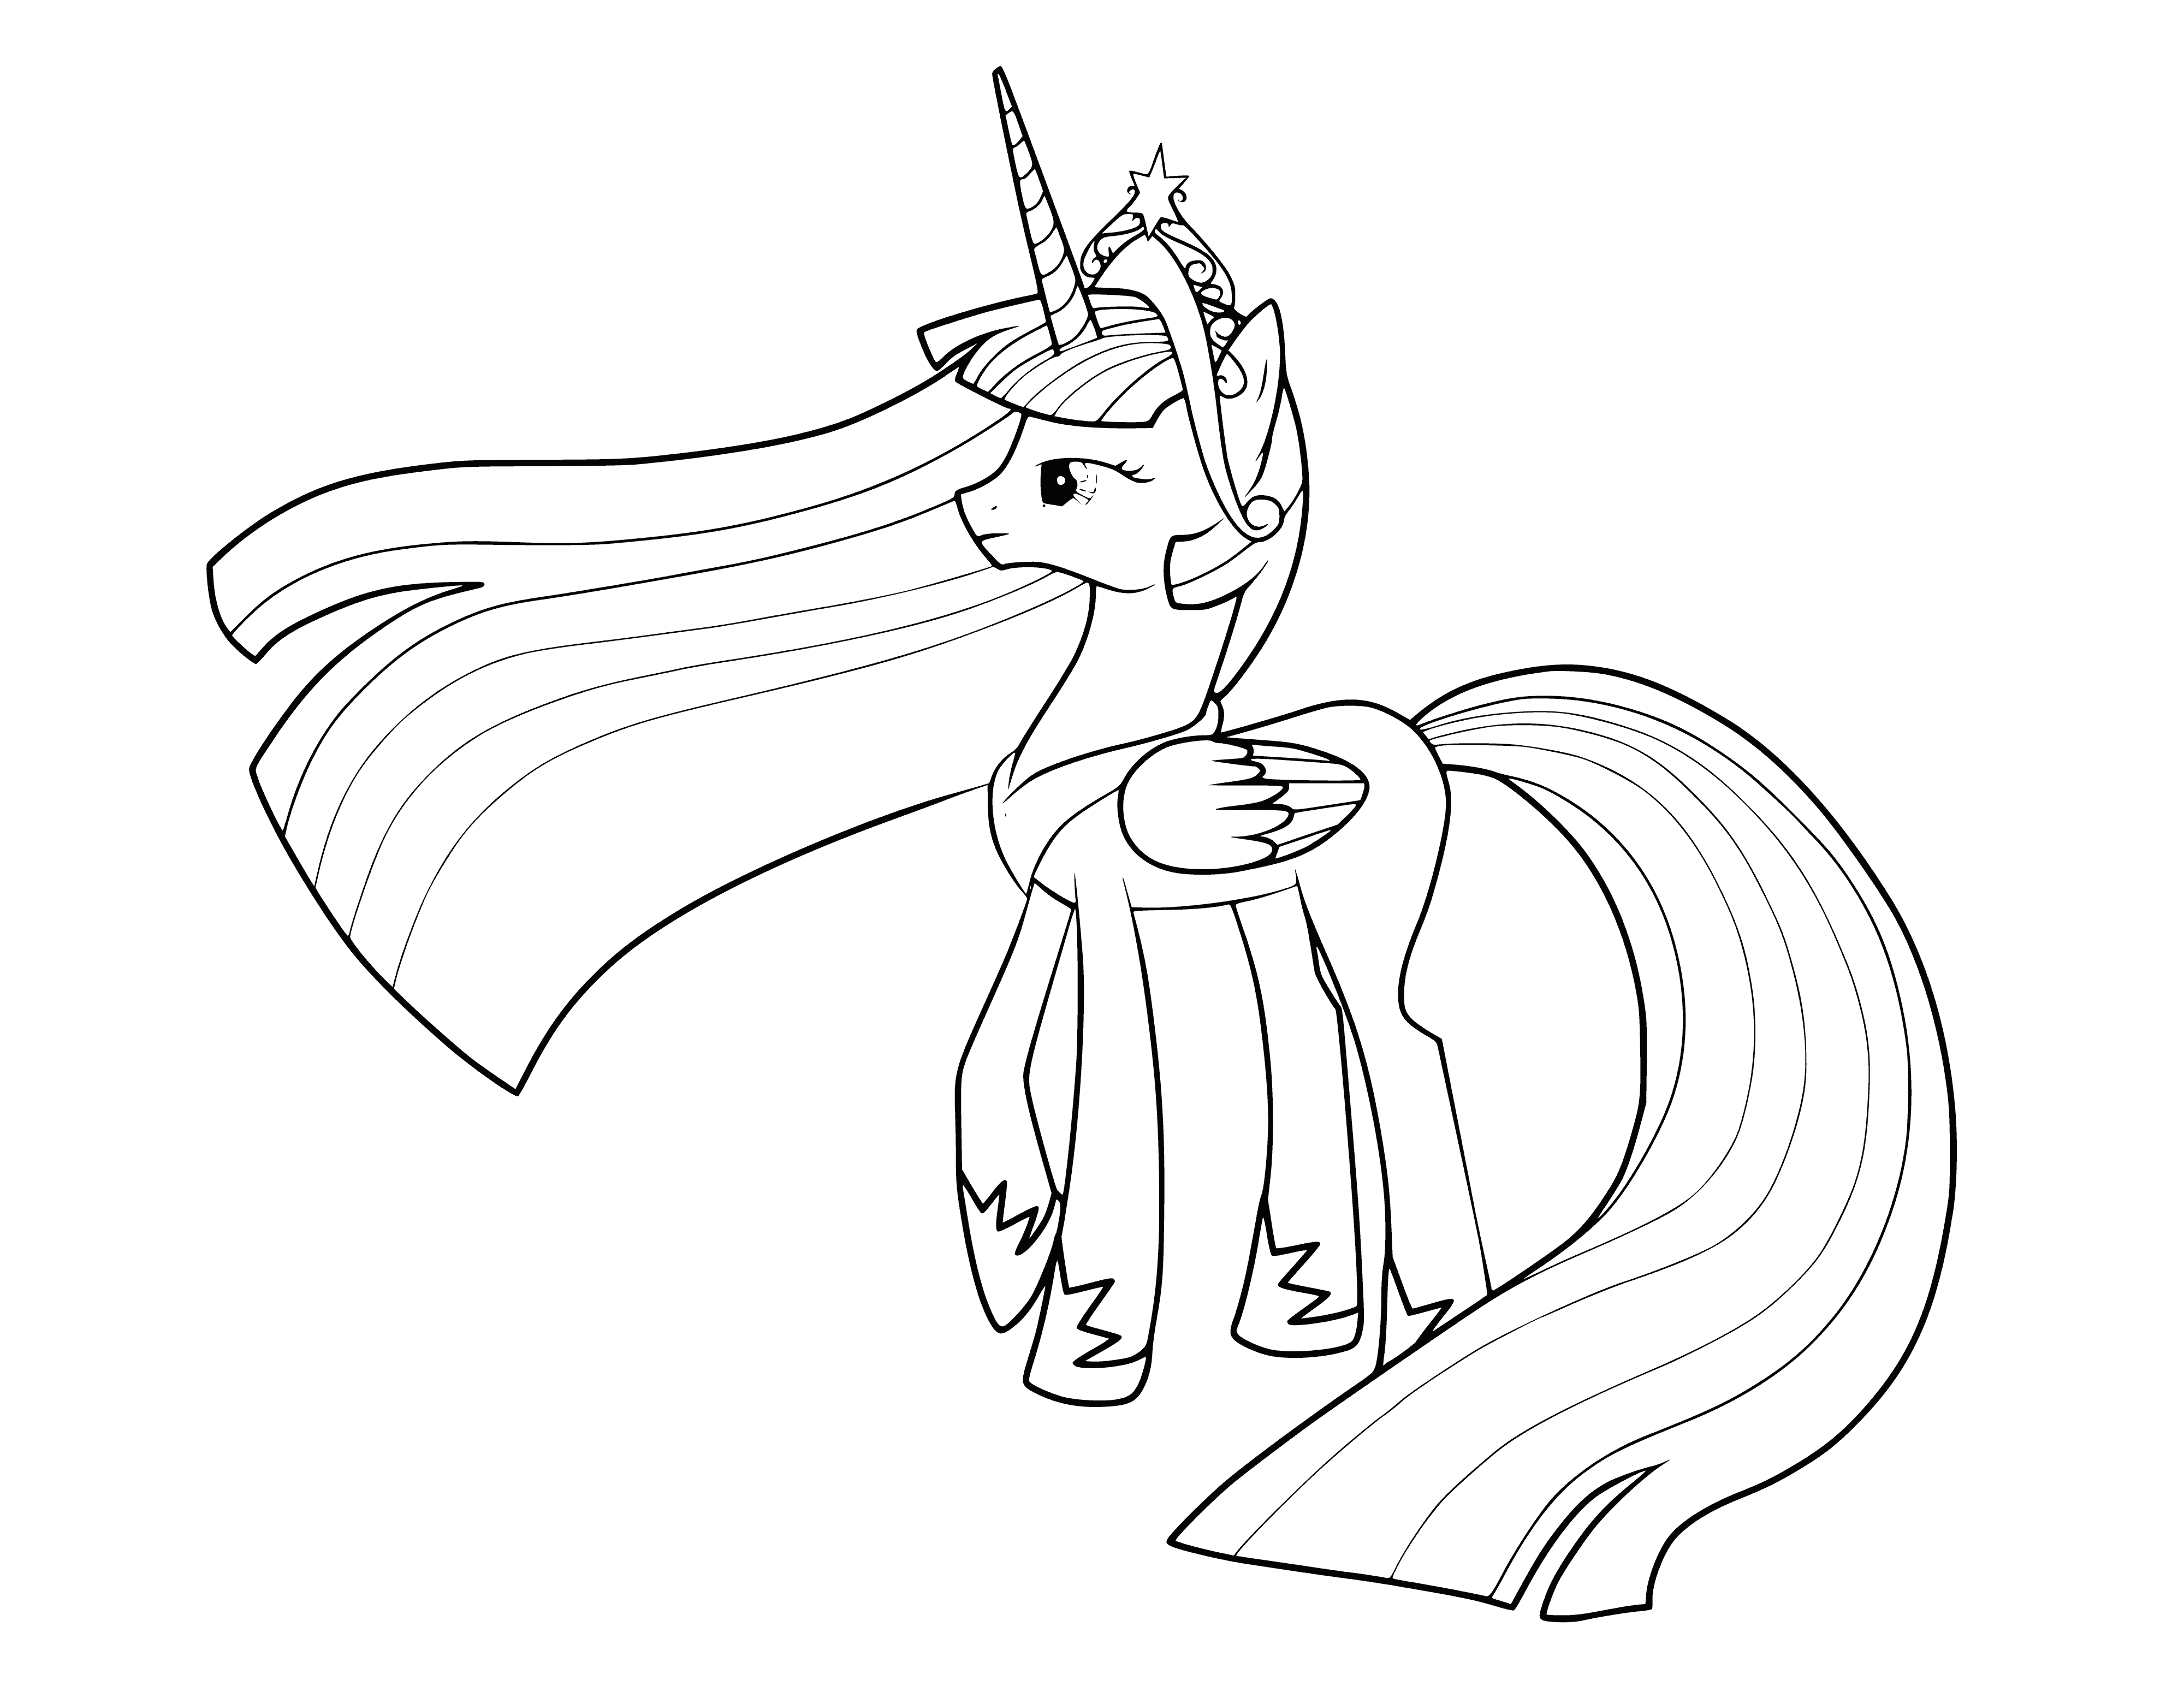 Princess Celestia is a magical alicorn who raises the sun each day with her regal grace.